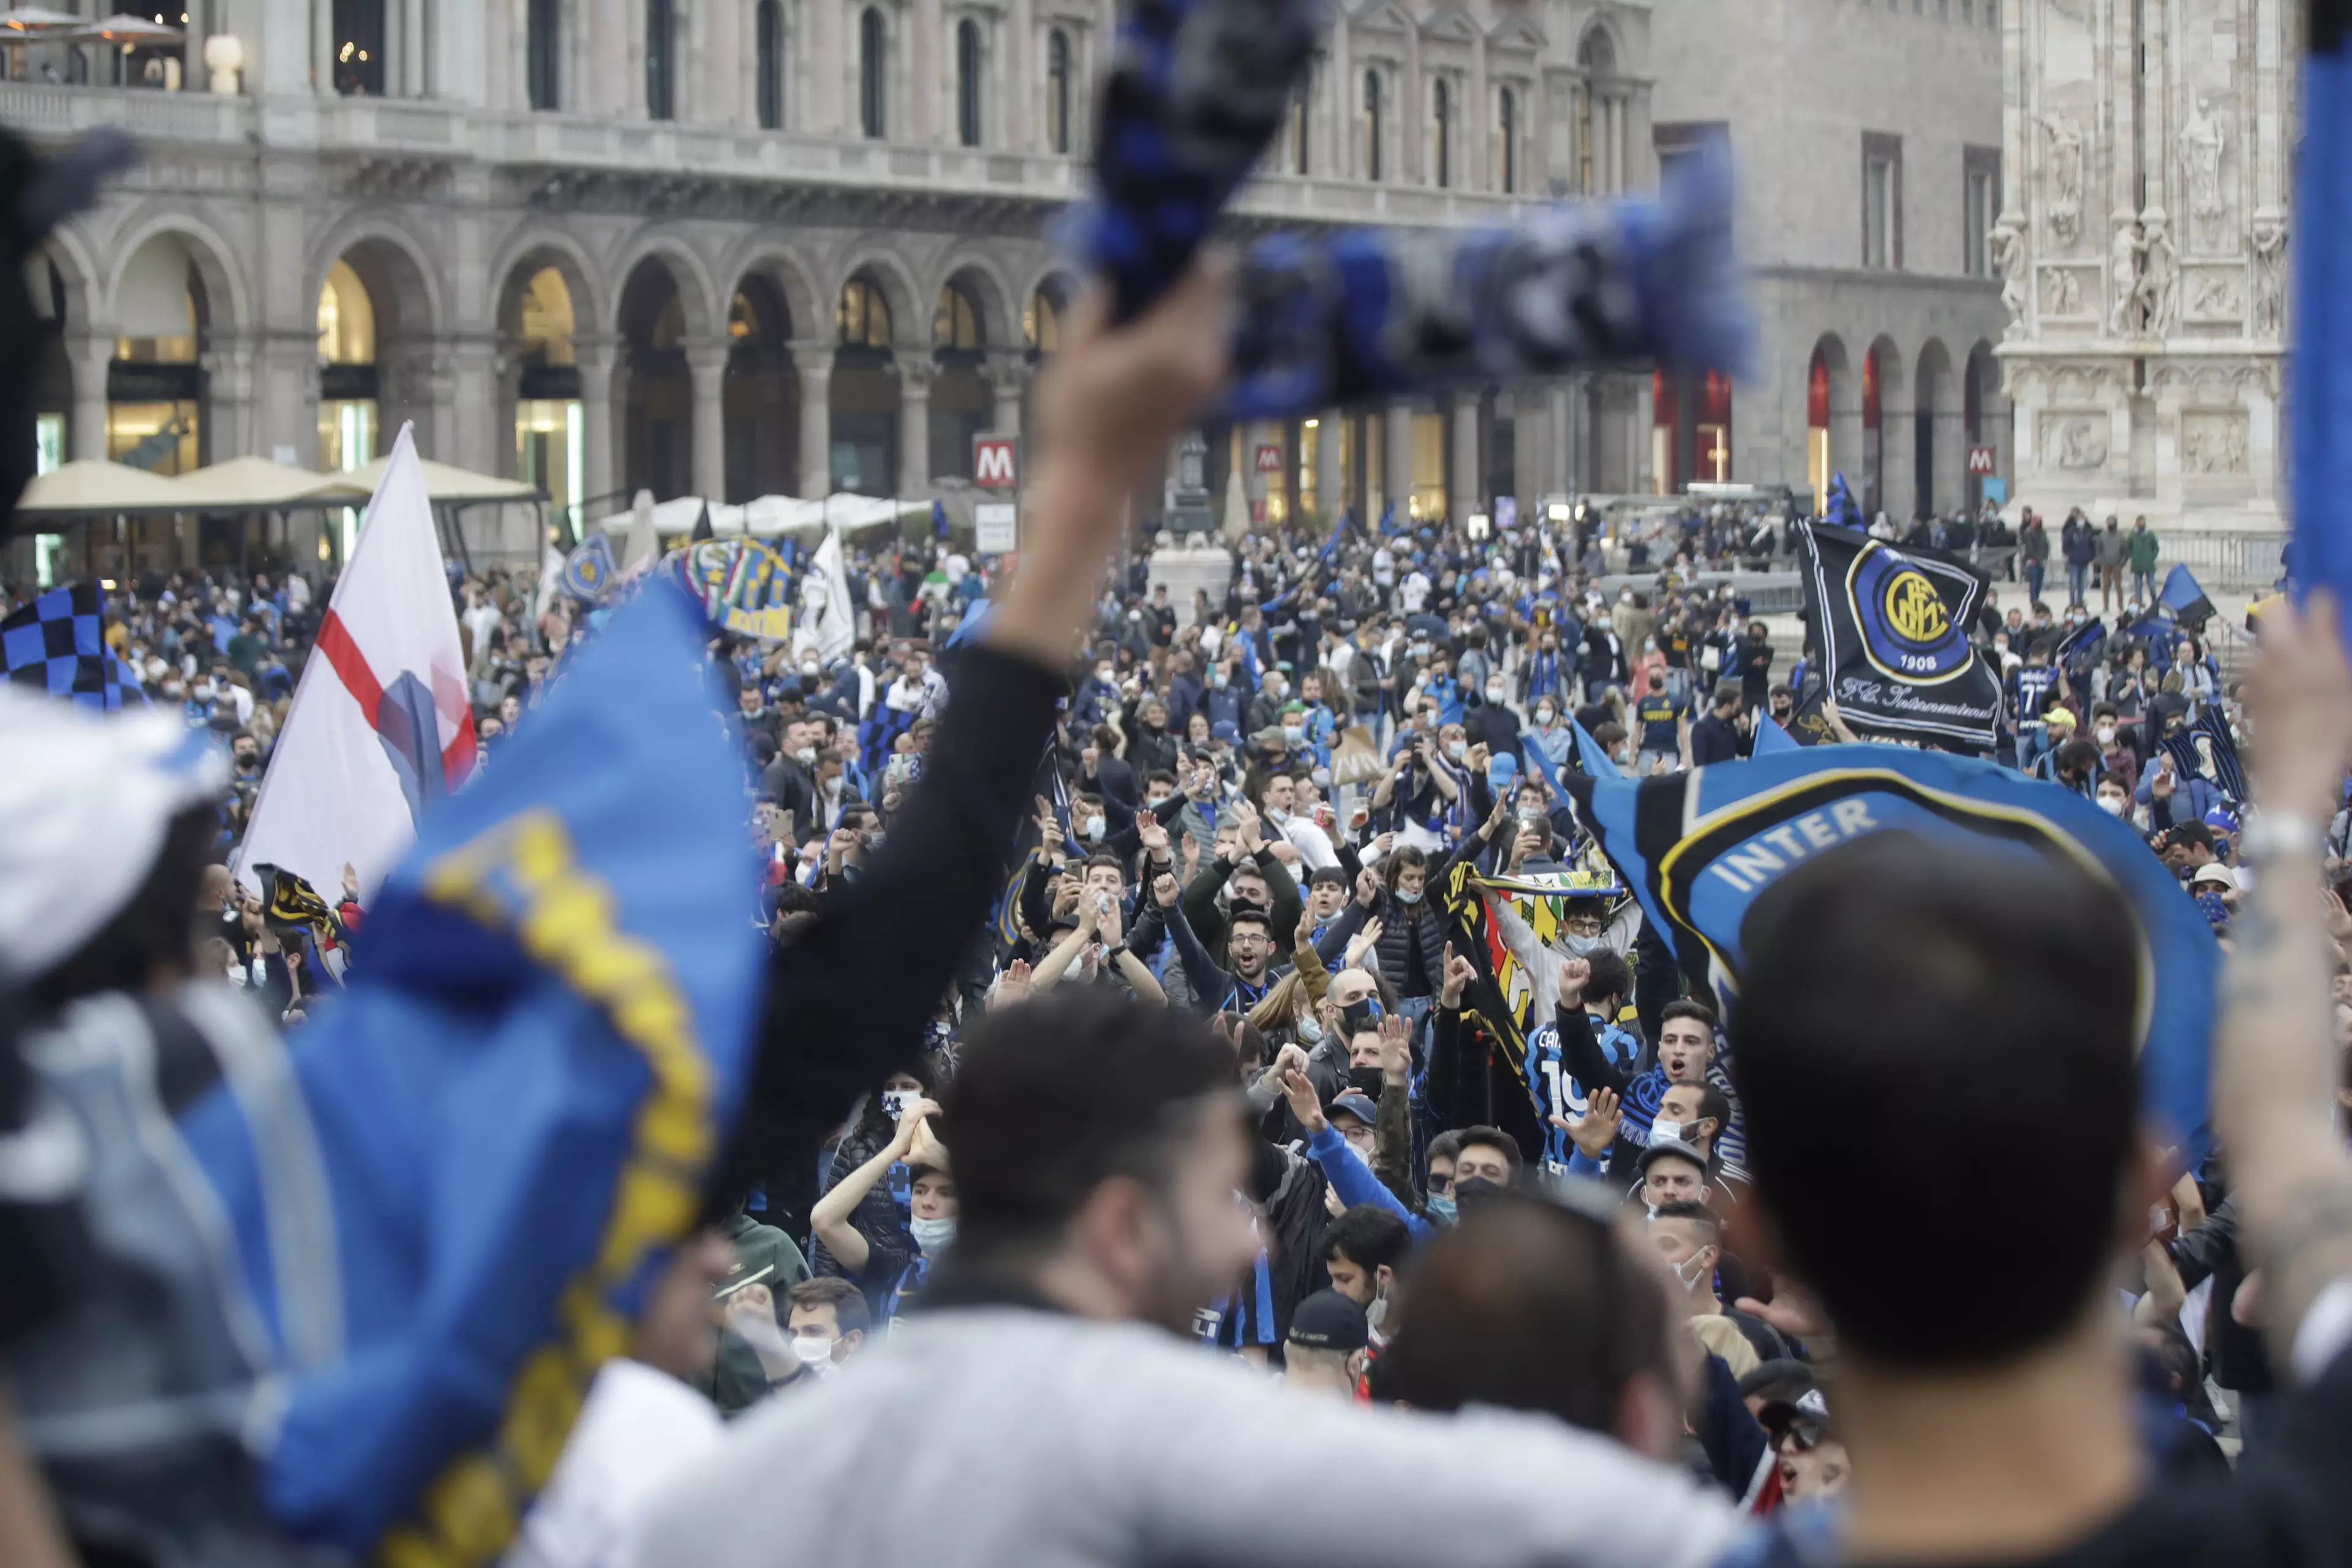 Inter fans celebrate their title. Image: PA Images